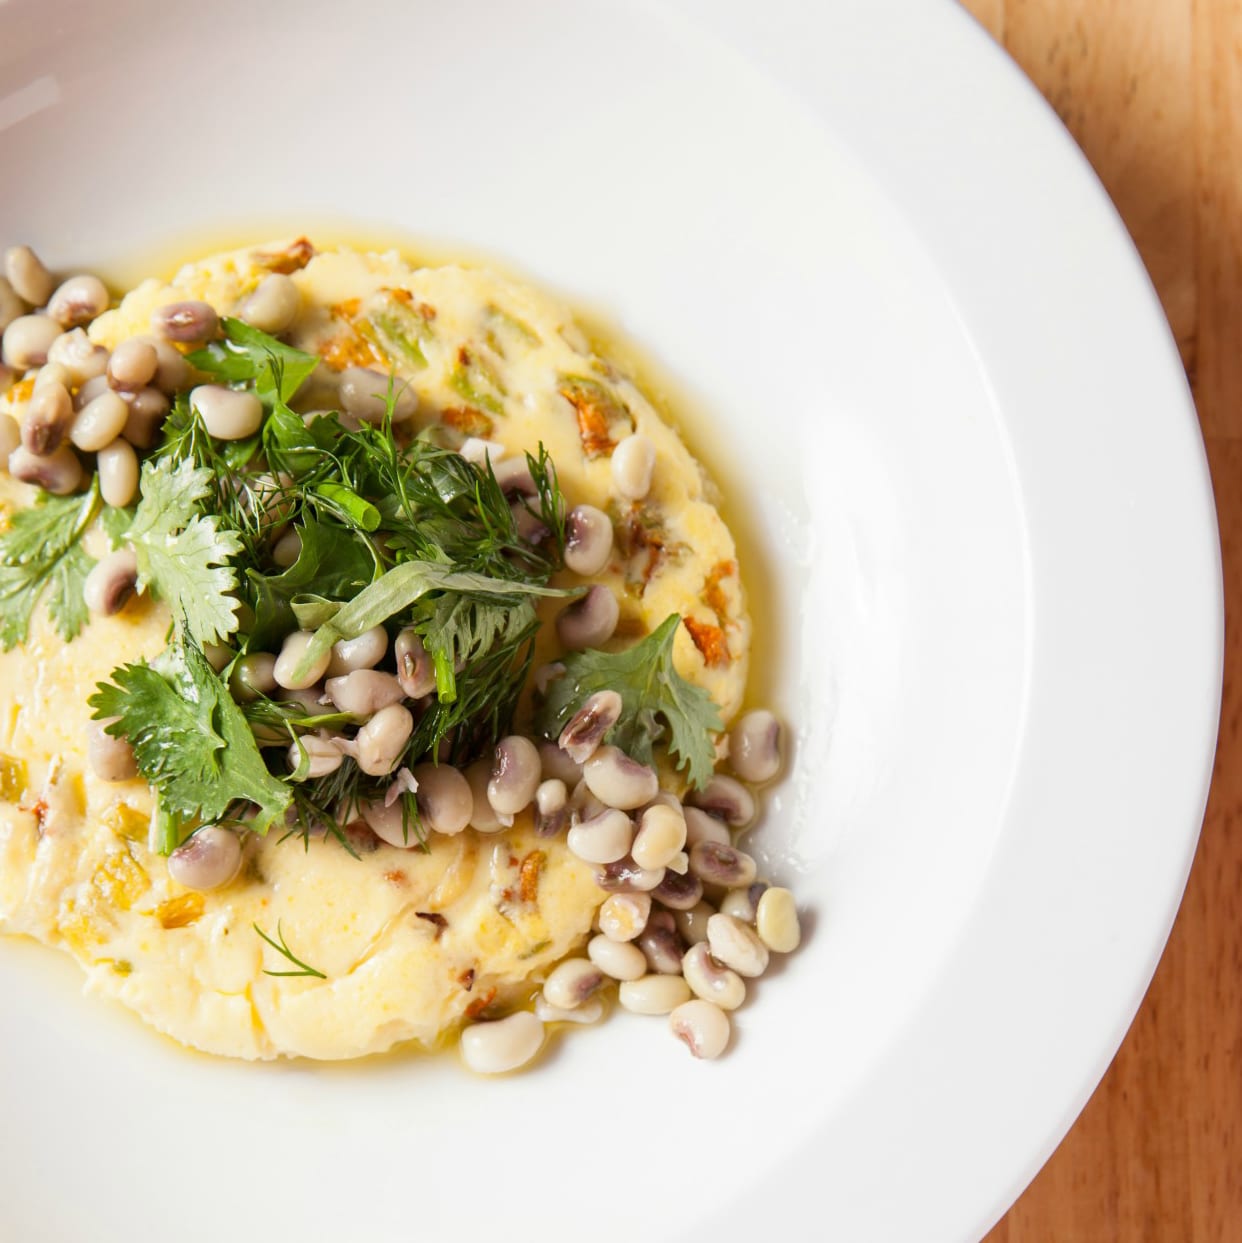 Squash Blossom Frittata with Field Peas and Herbs from Chef Chris Rainosek of The Noble South